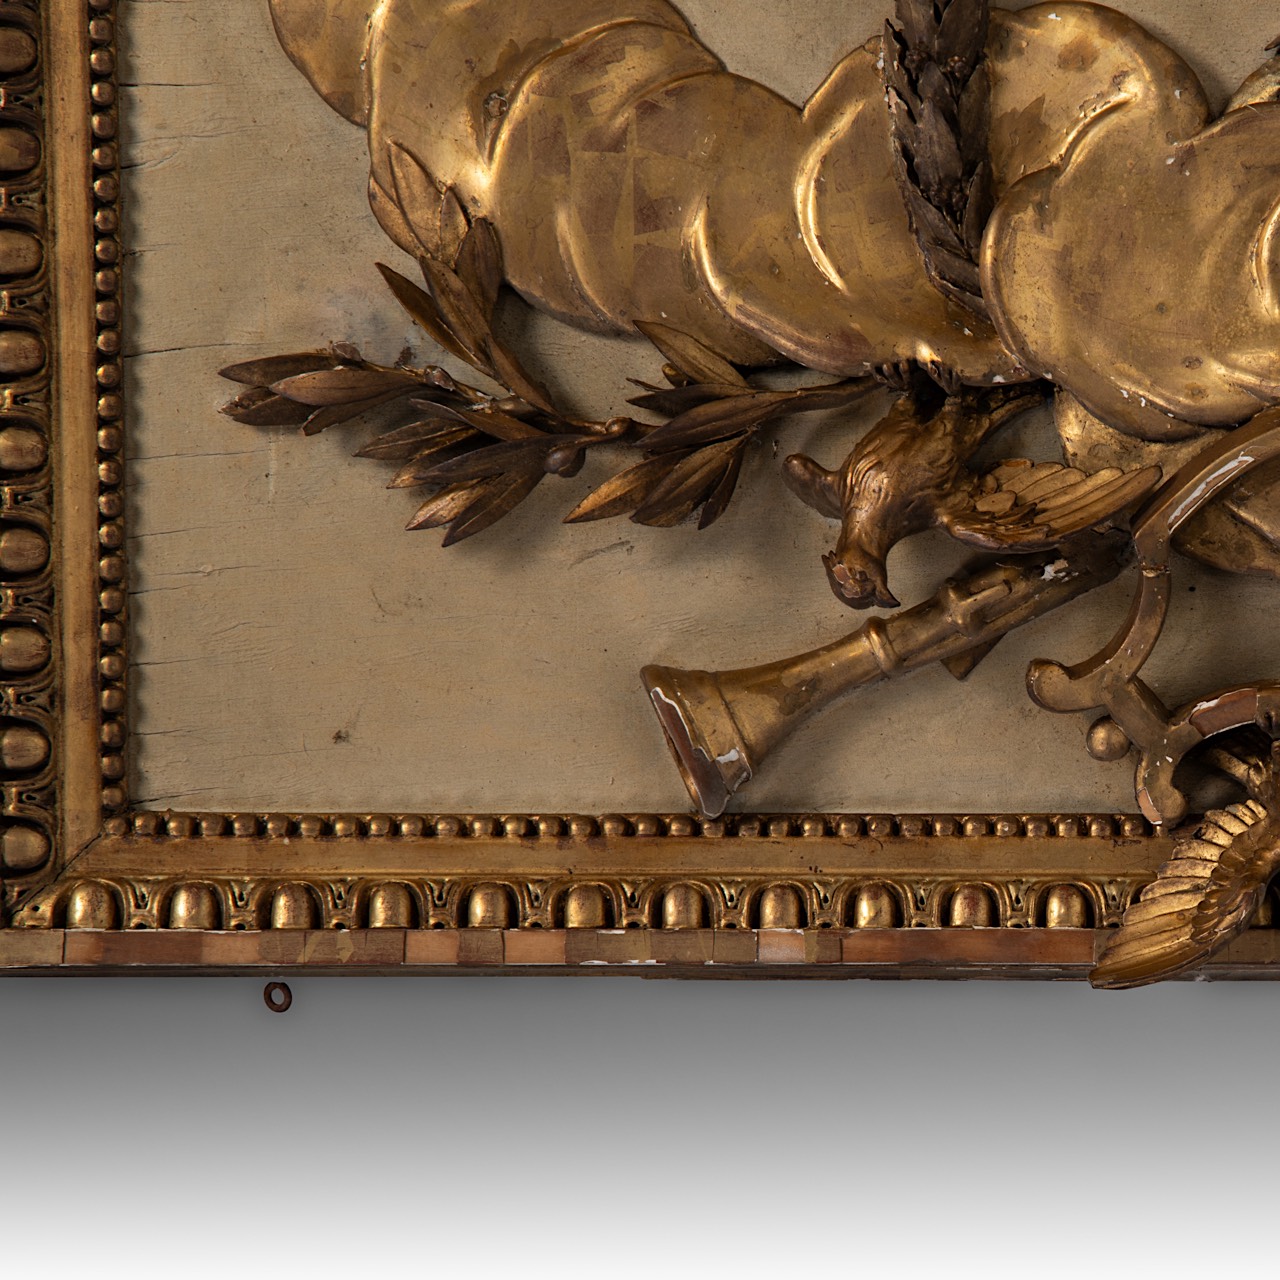 A Louis XVI giltwood trumeau mirror, decorated with a trophy on top, H 270 - W 118 cm - Image 6 of 8